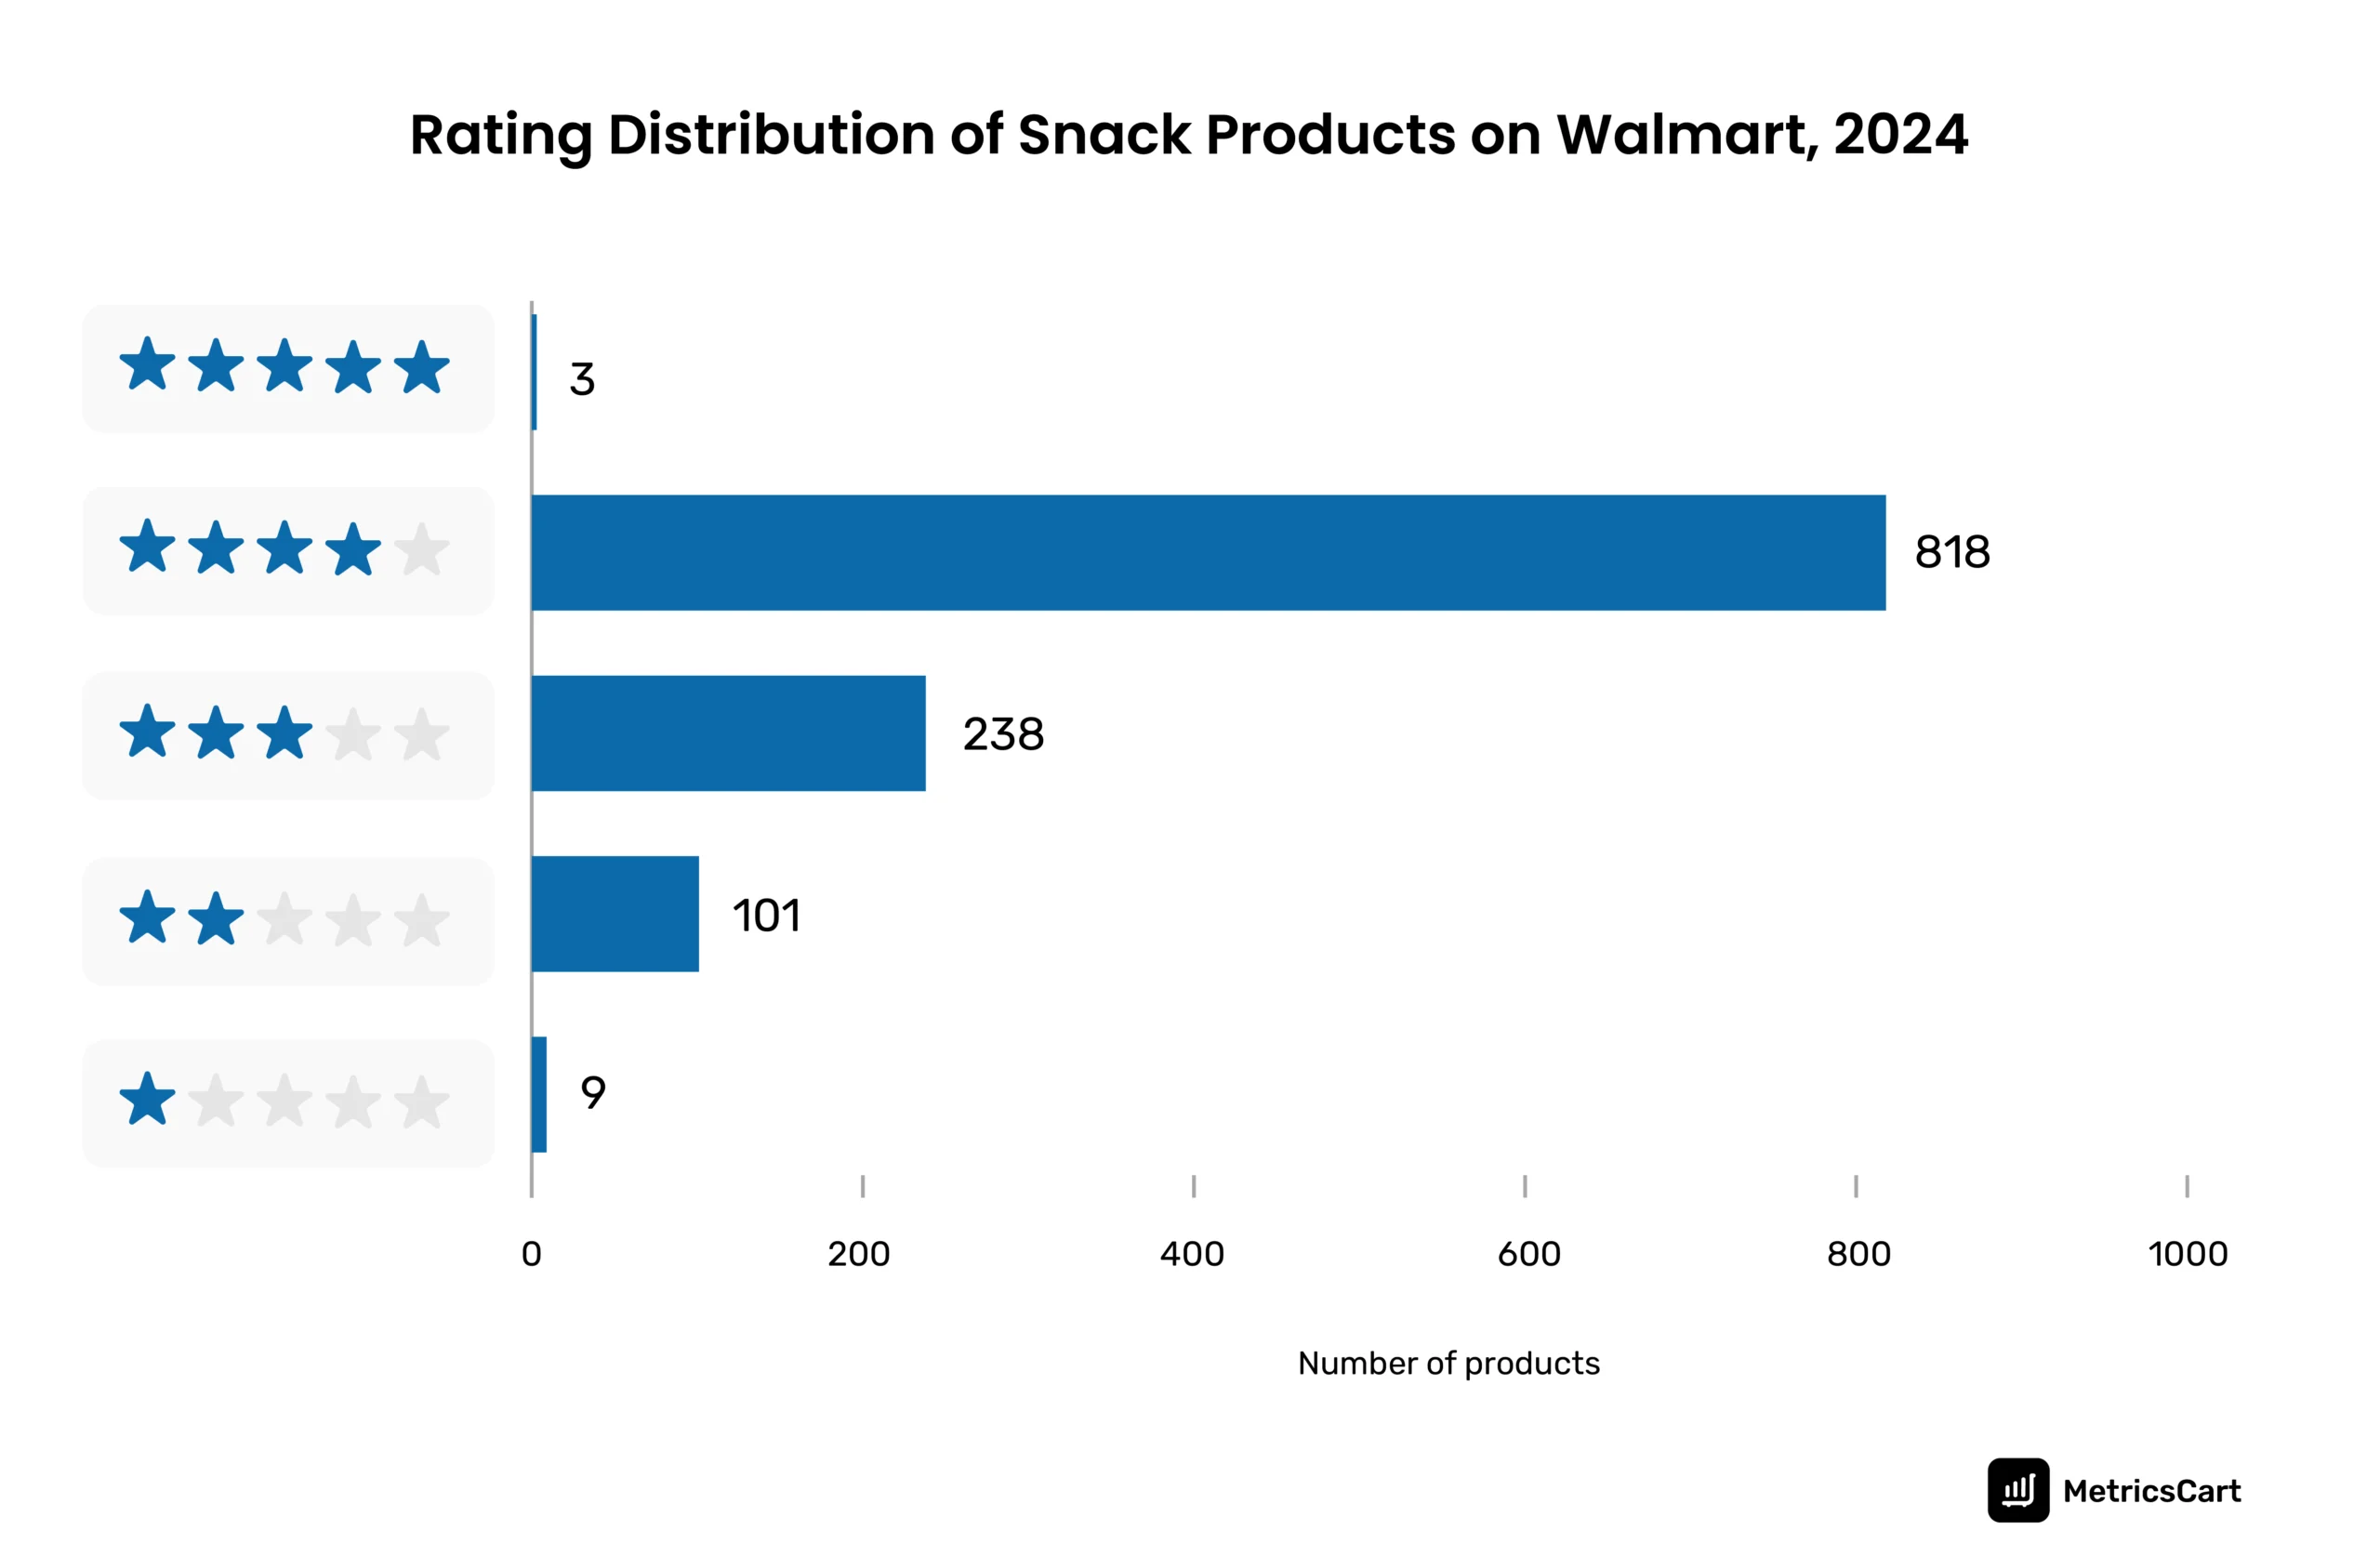 The graph shows the distribution of customer ratings for various snack products available at Walmart. 